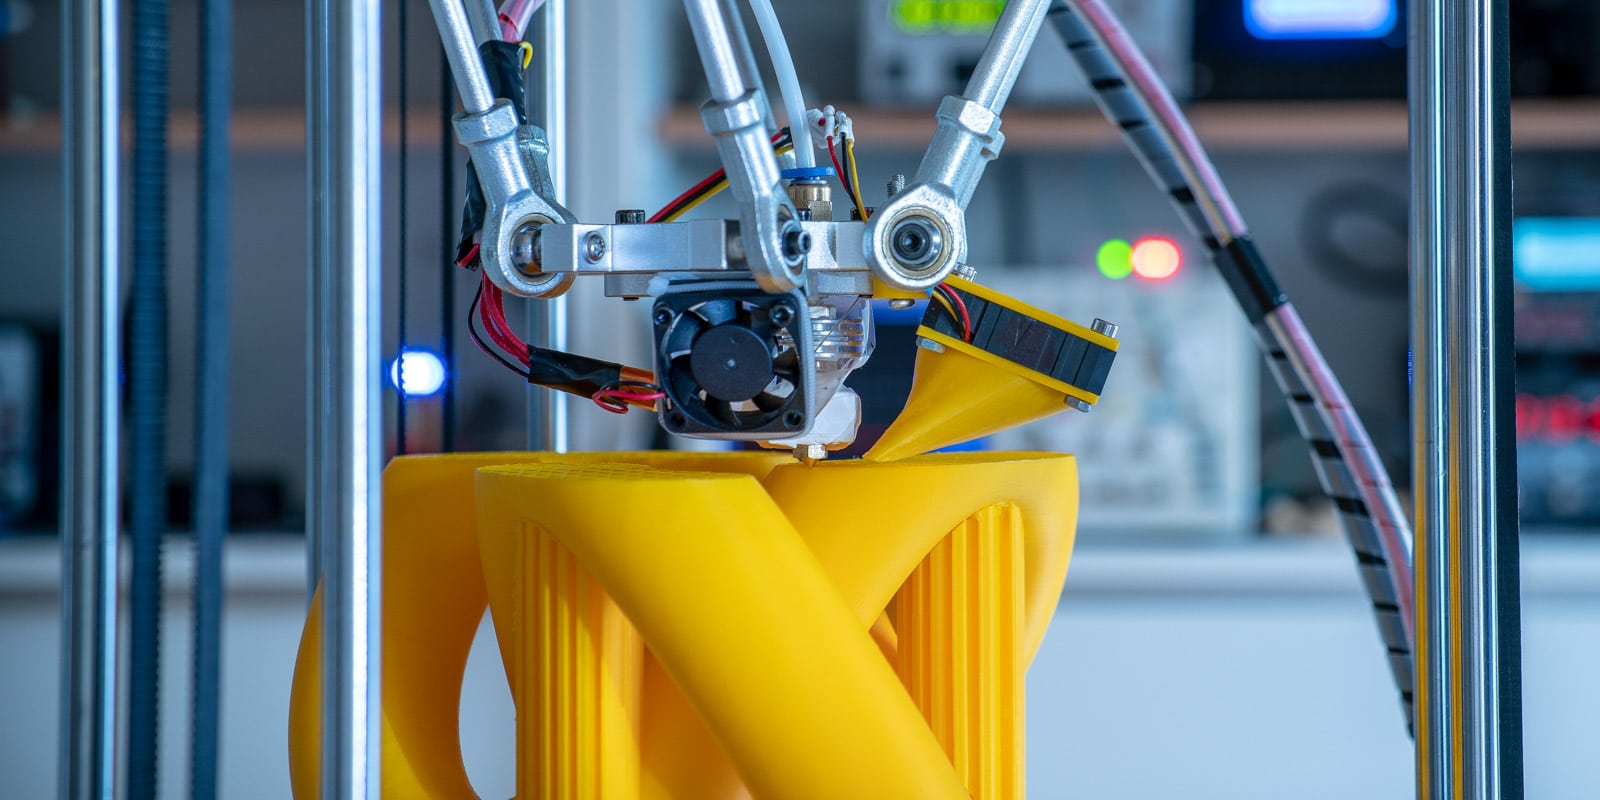 How much does 3D printing cost